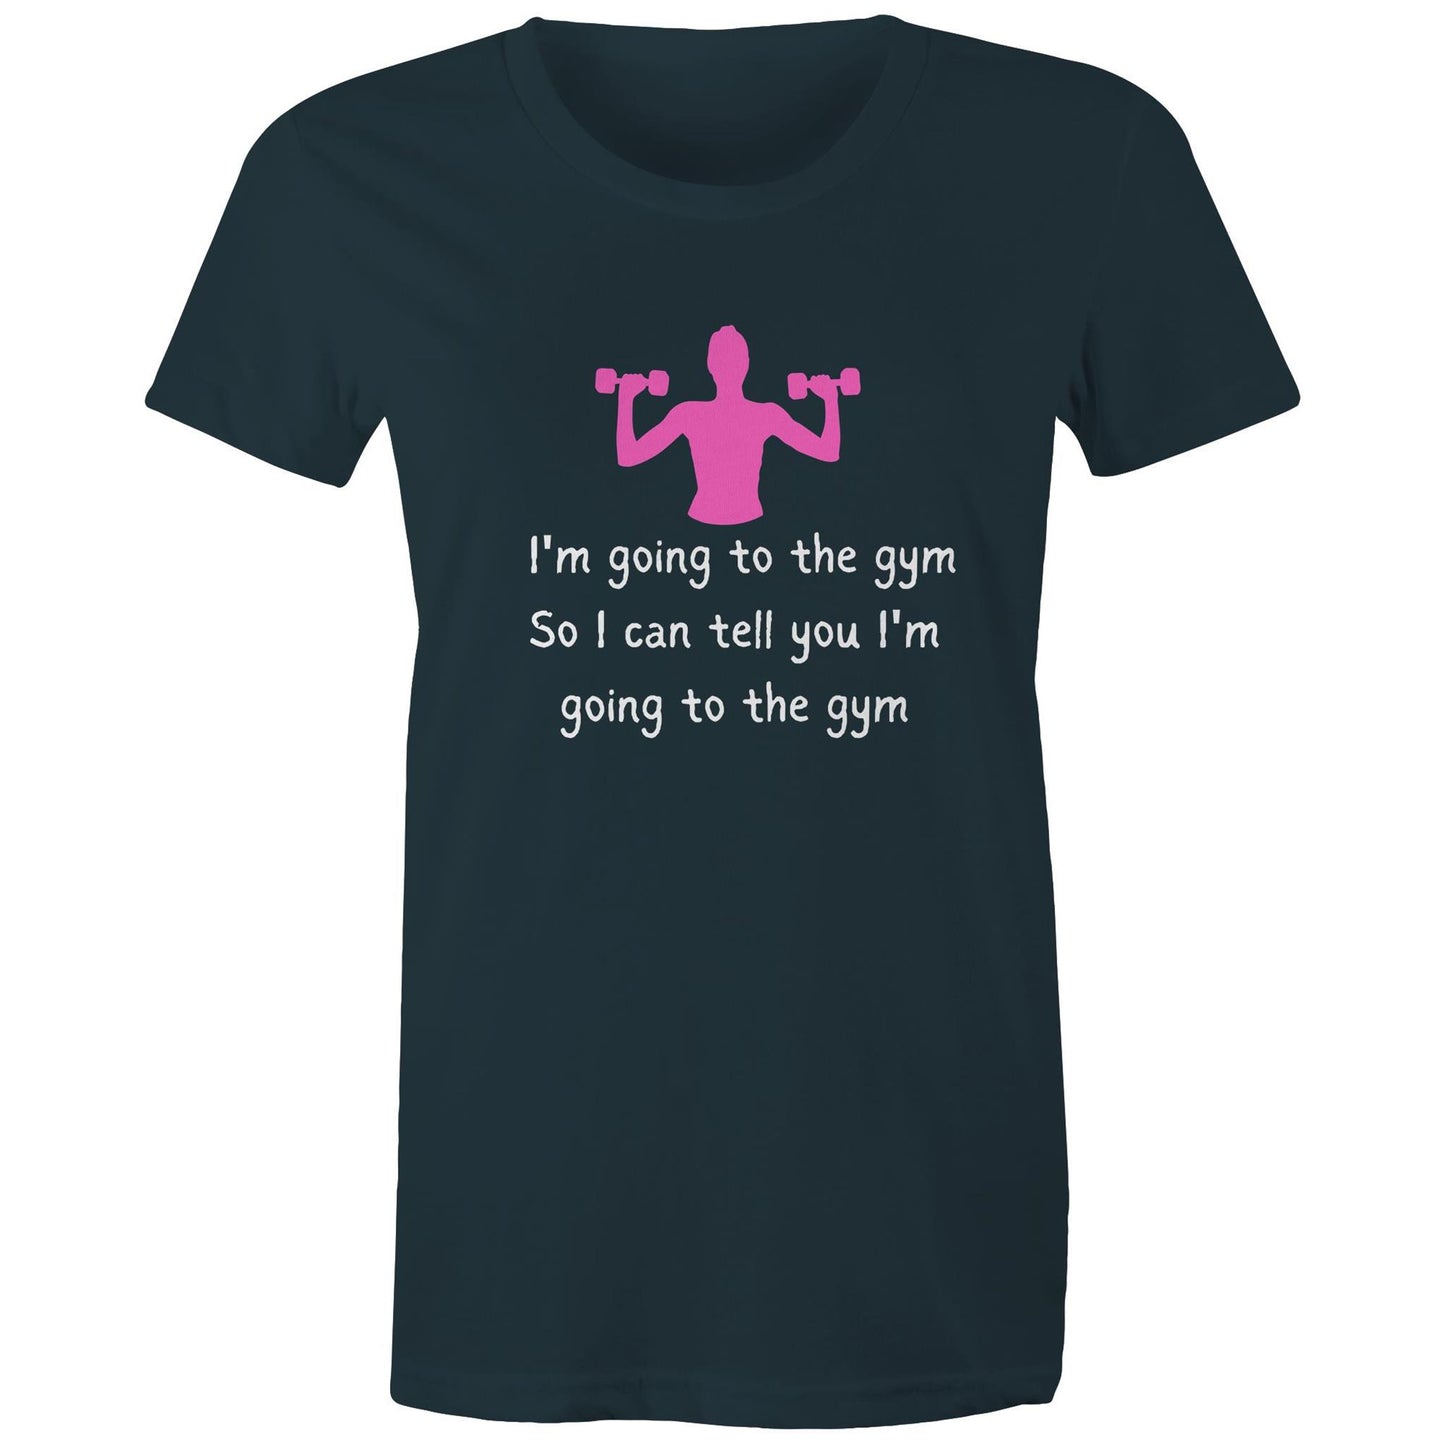 GOING TO THE GYM Women's Maple Tee